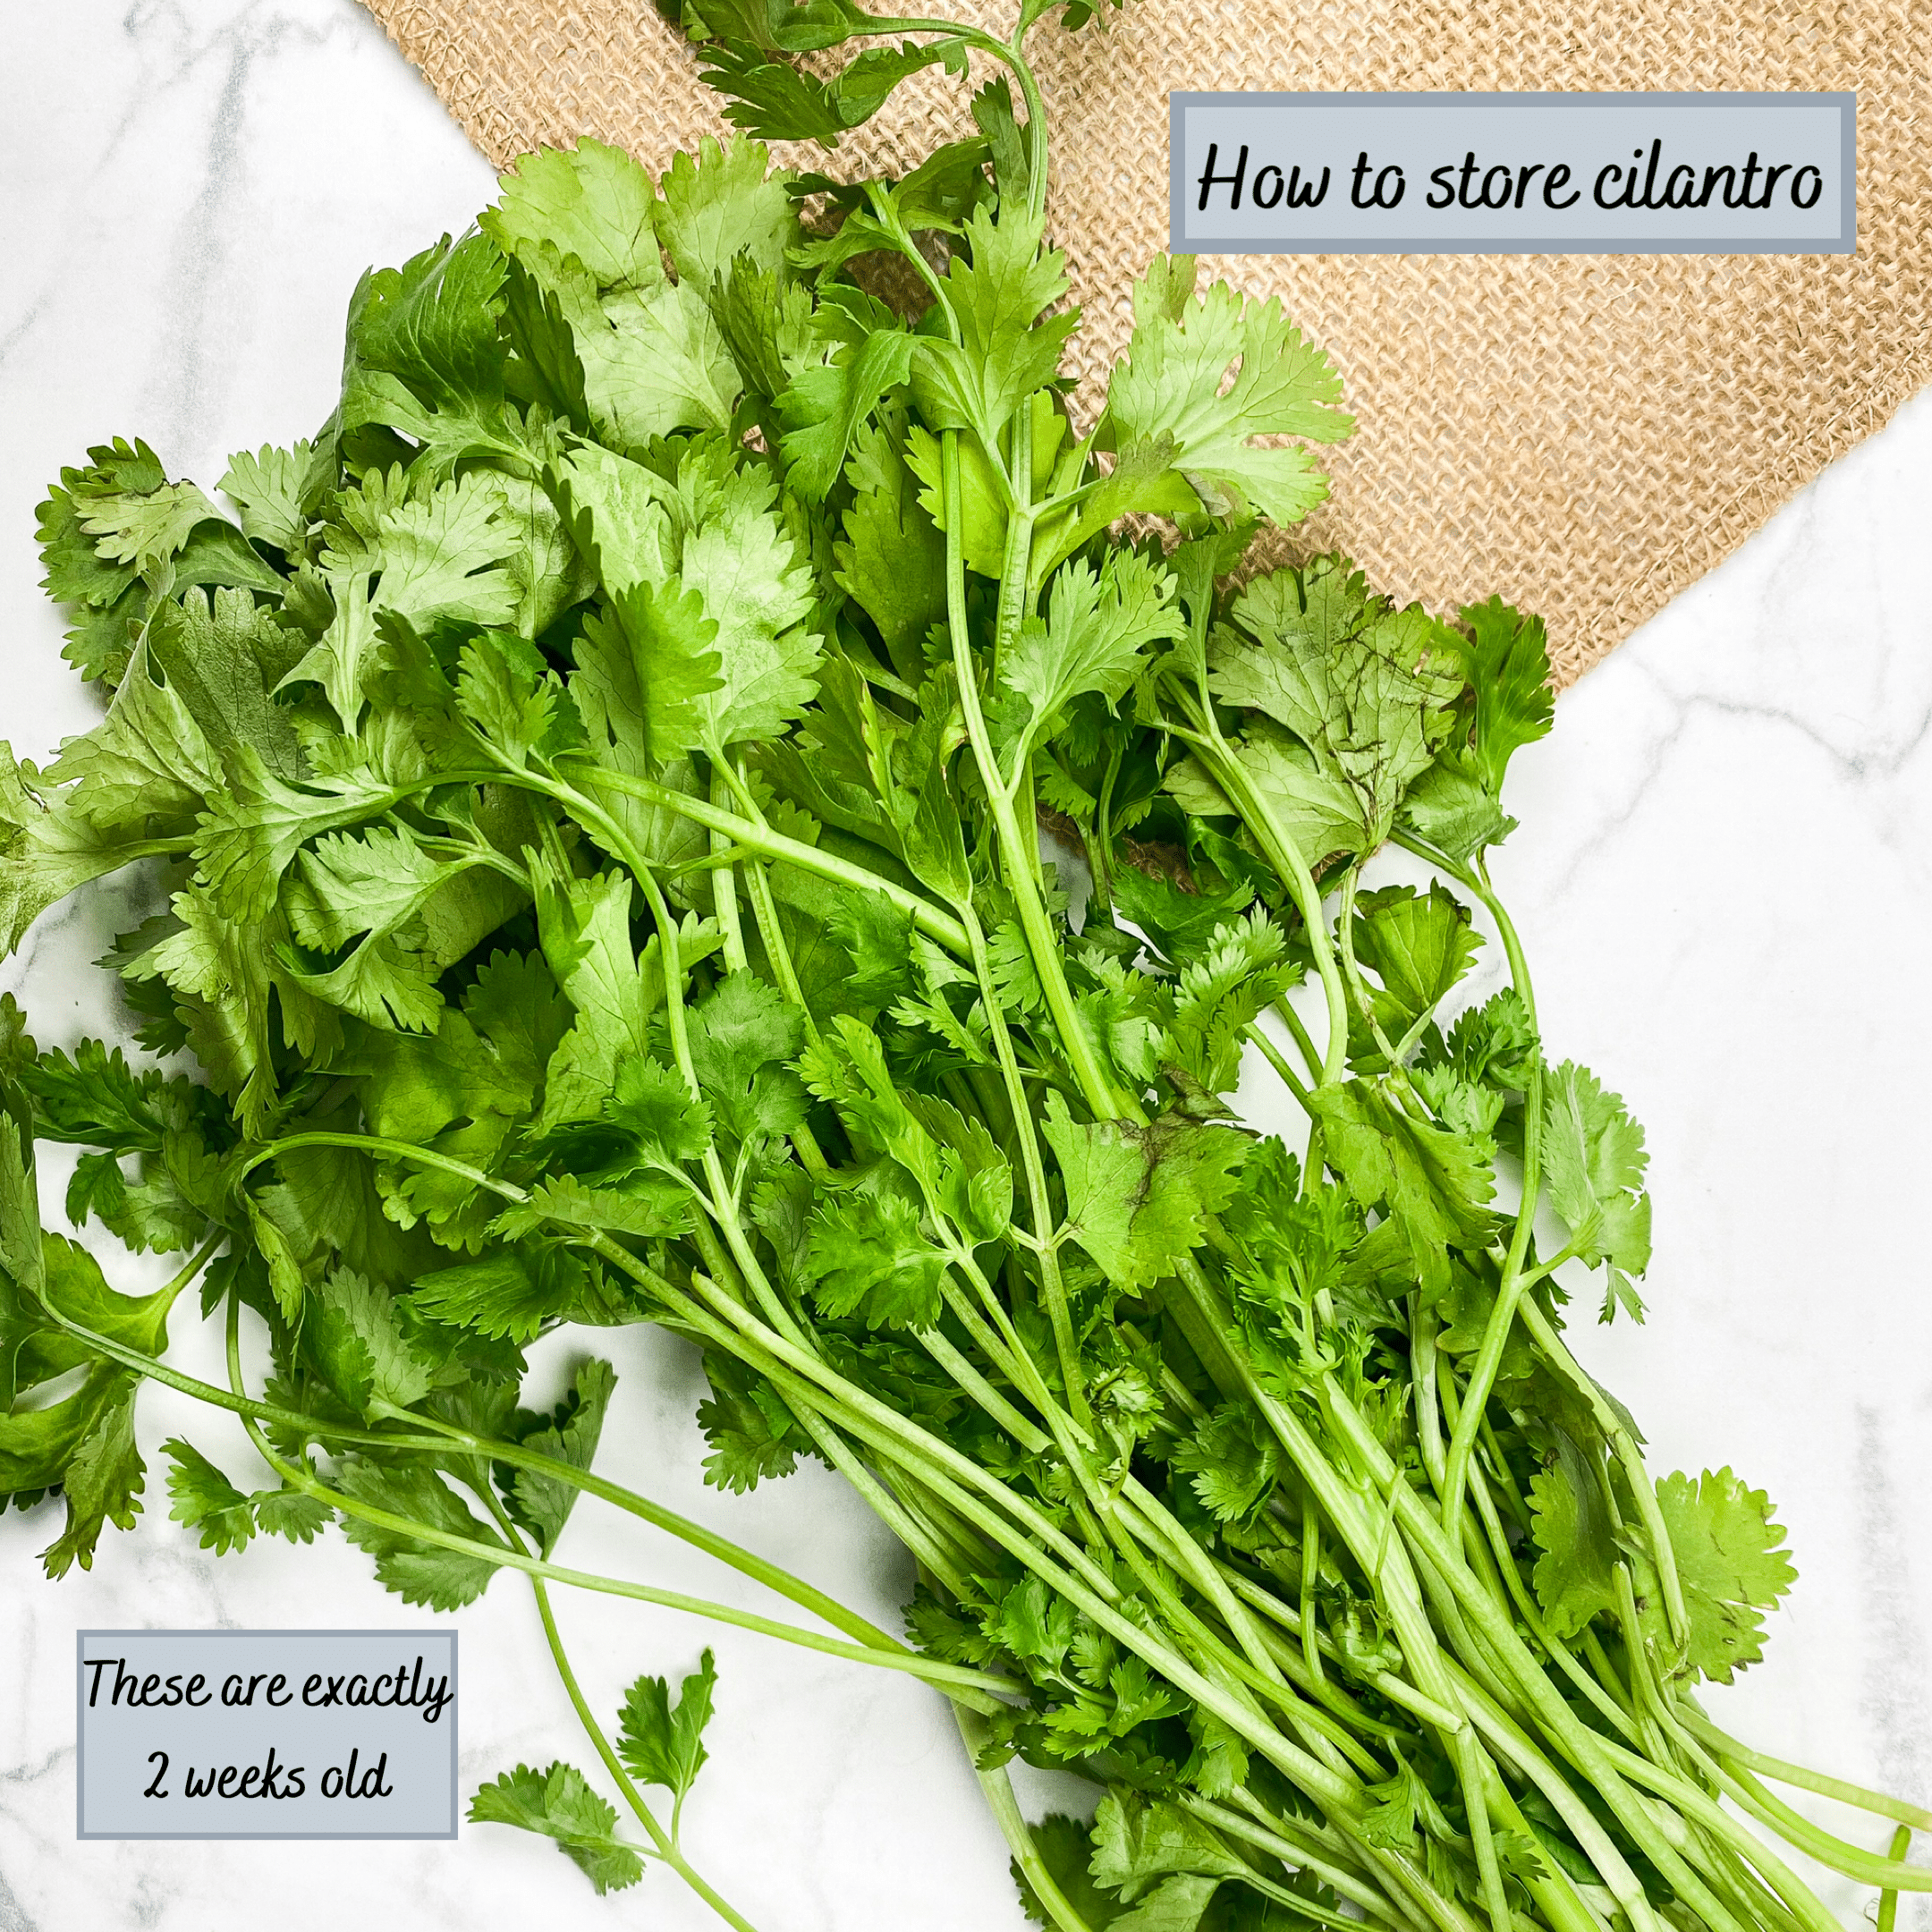 Keeping cilantro fresh for weeks. How to store them